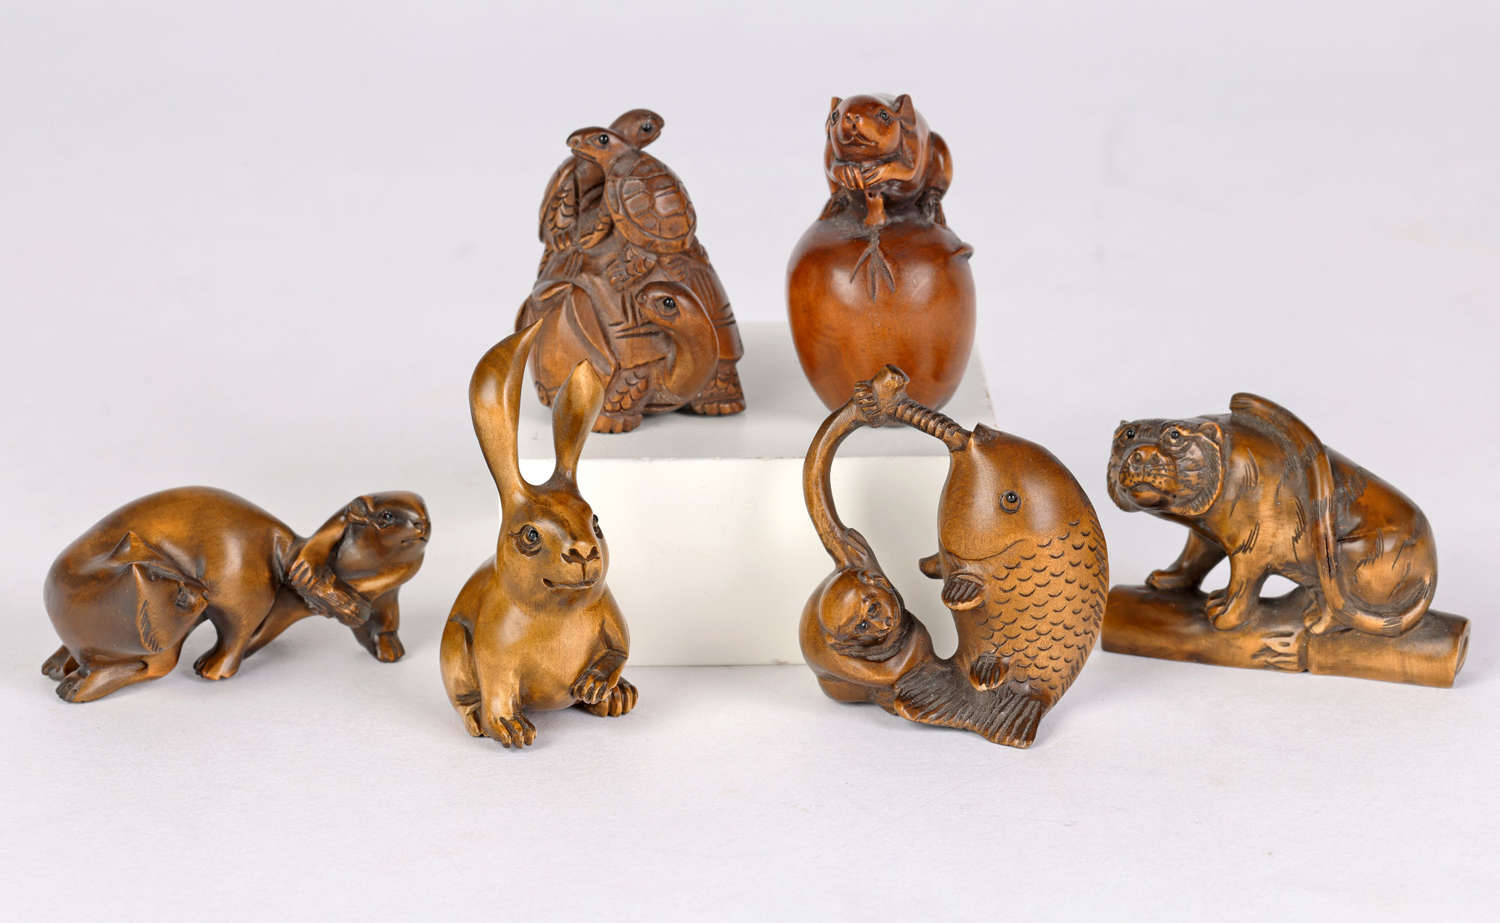 Japanese Collection Carved Wood Animal and Fish Netsuke